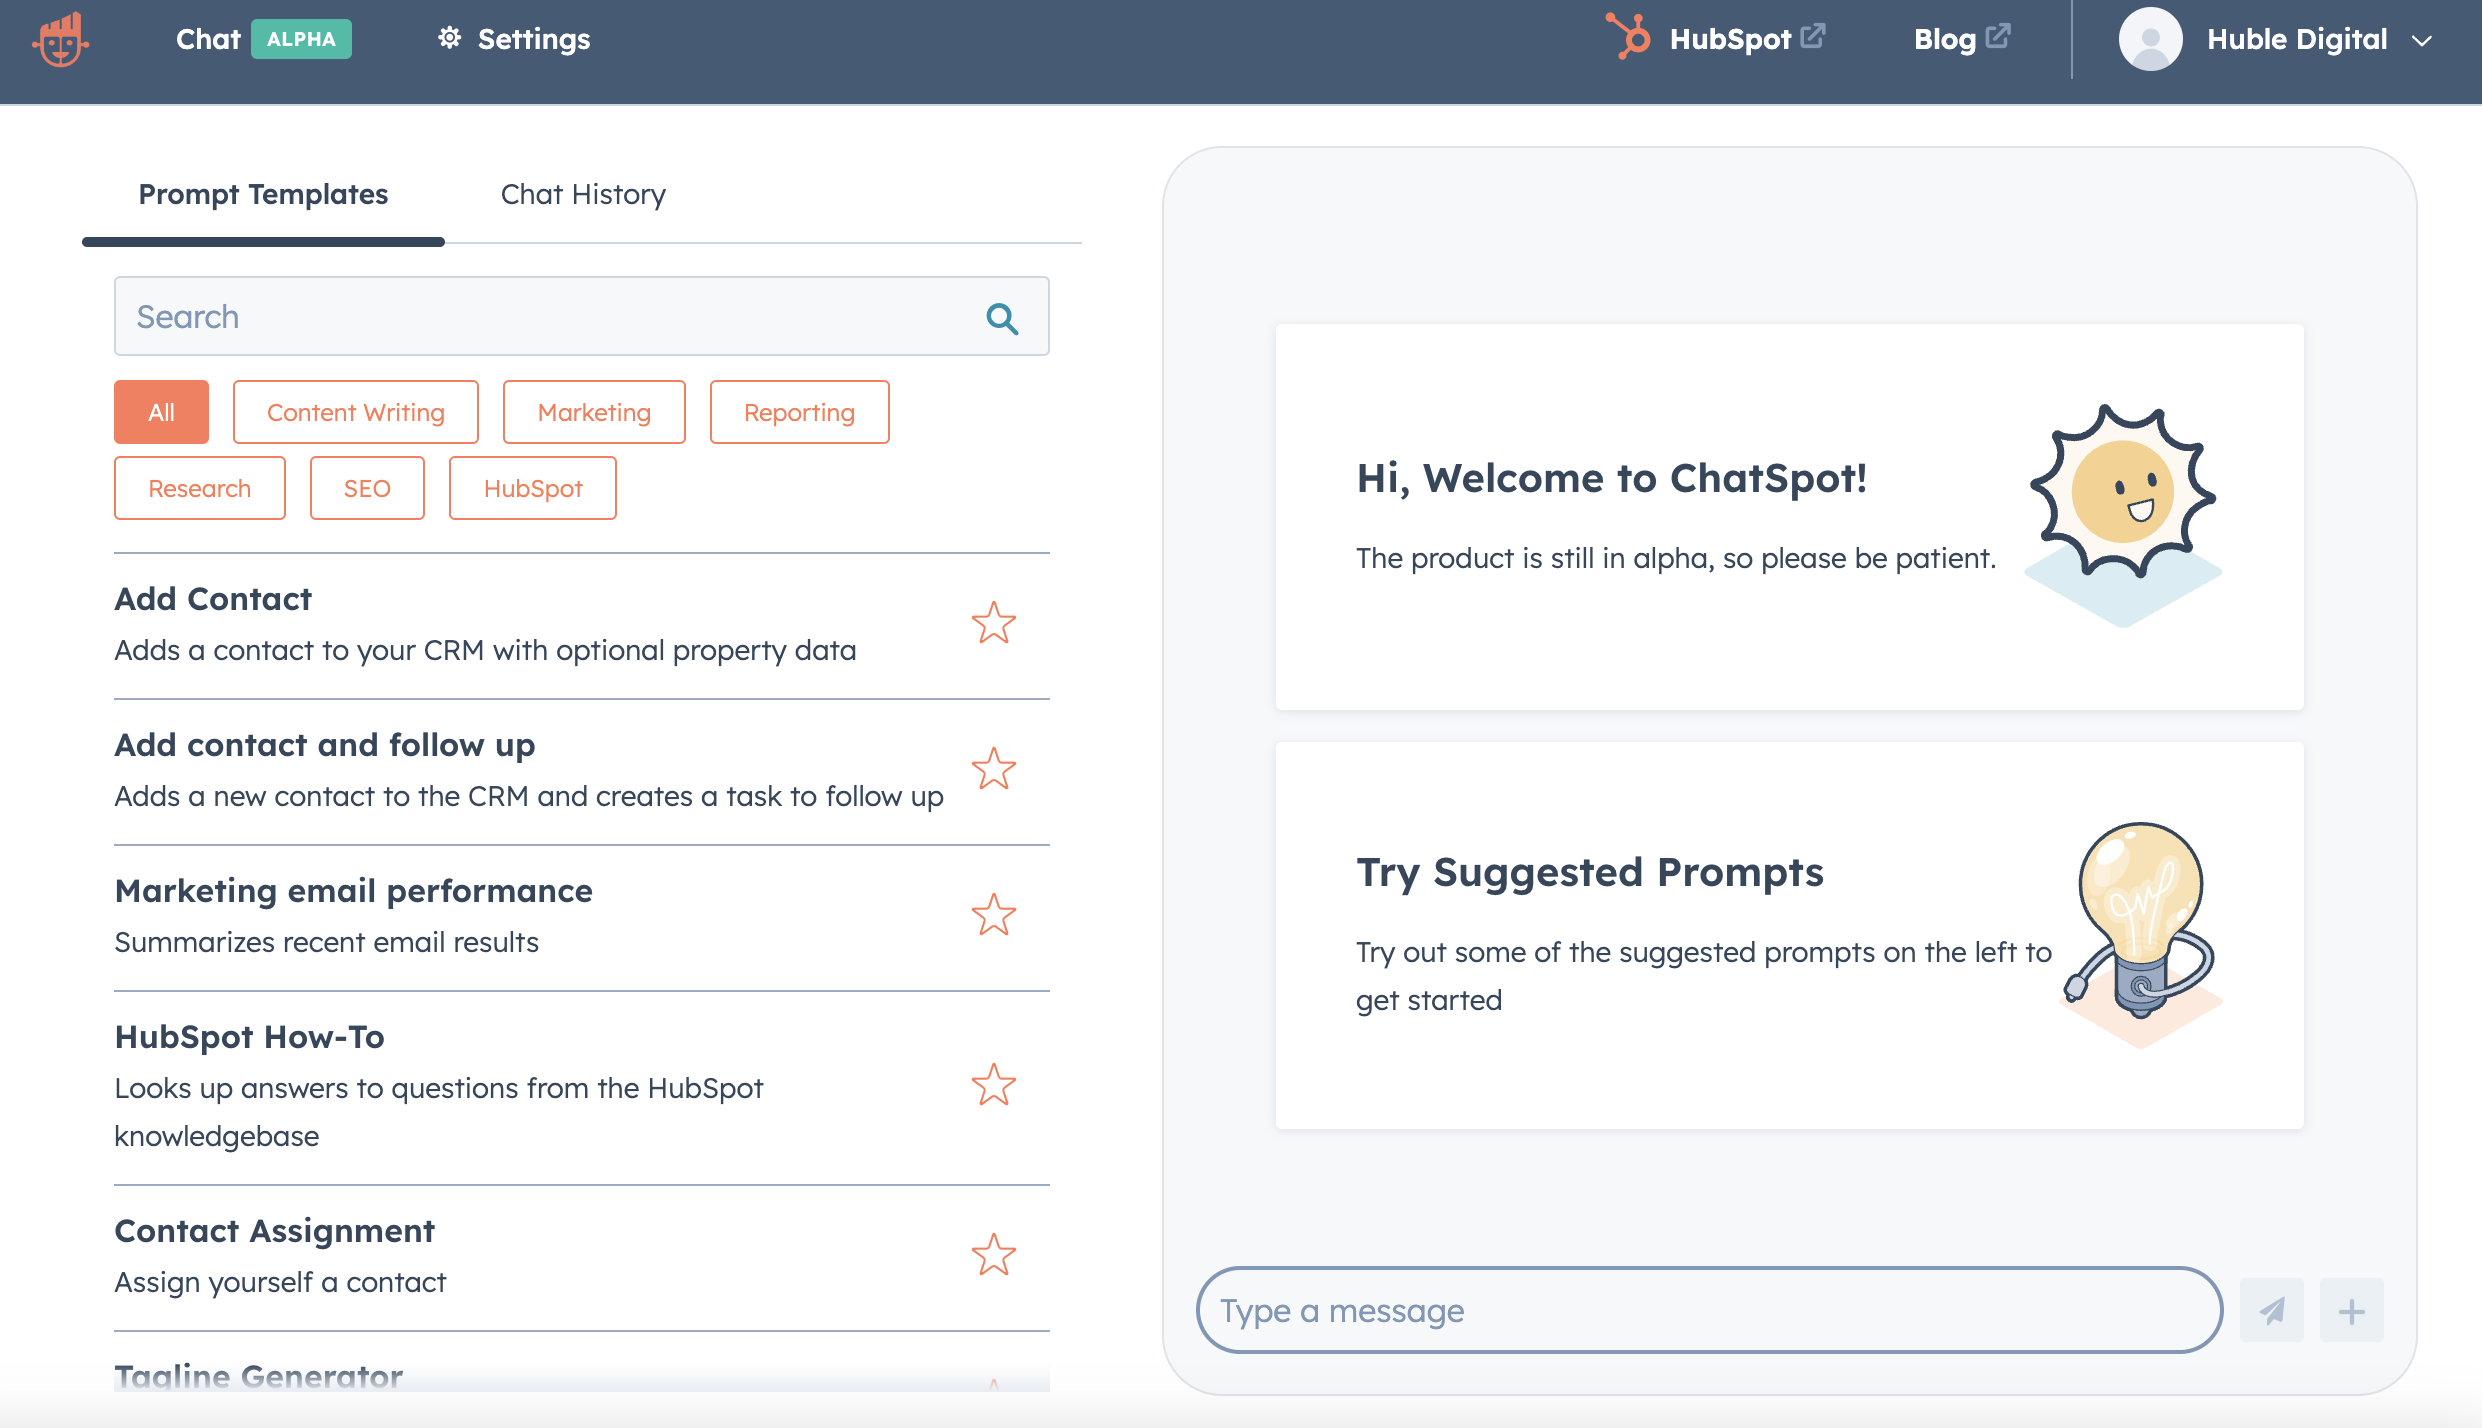 How marketers can use HubSpot's AI Chatbot